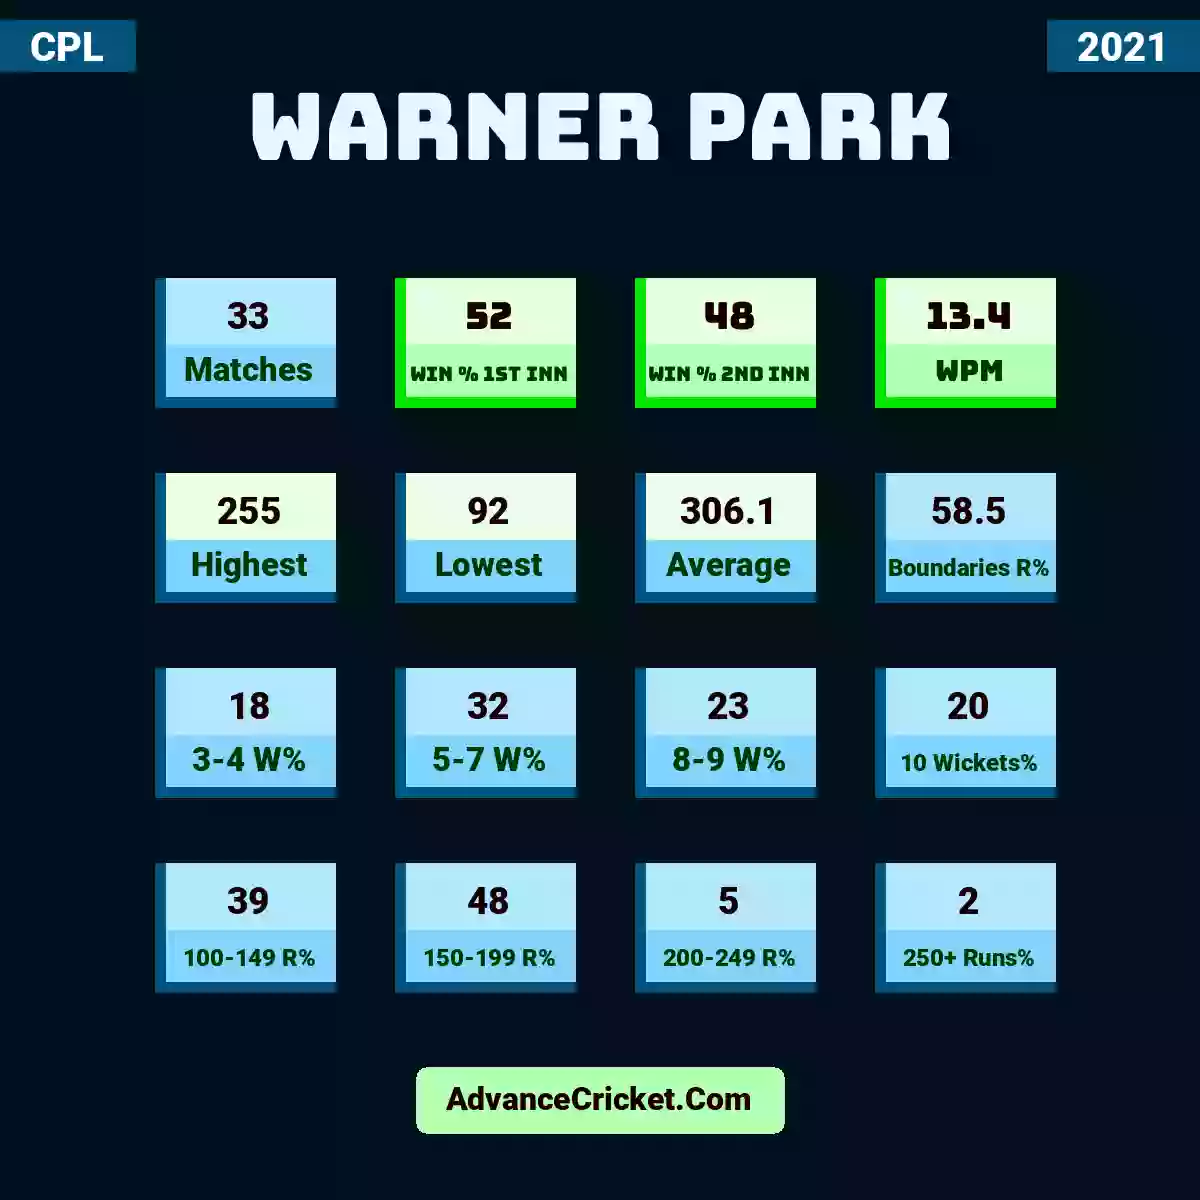 Image showing Warner Park with Matches: 33, Win % 1st Inn: 52, Win % 2nd Inn: 48, WPM: 13.4, Highest: 255, Lowest: 92, Average: 306.1, Boundaries R%: 58.5, 3-4 W%: 18, 5-7 W%: 32, 8-9 W%: 23, 10 Wickets%: 20, 100-149 R%: 39, 150-199 R%: 48, 200-249 R%: 5, 250+ Runs%: 2.